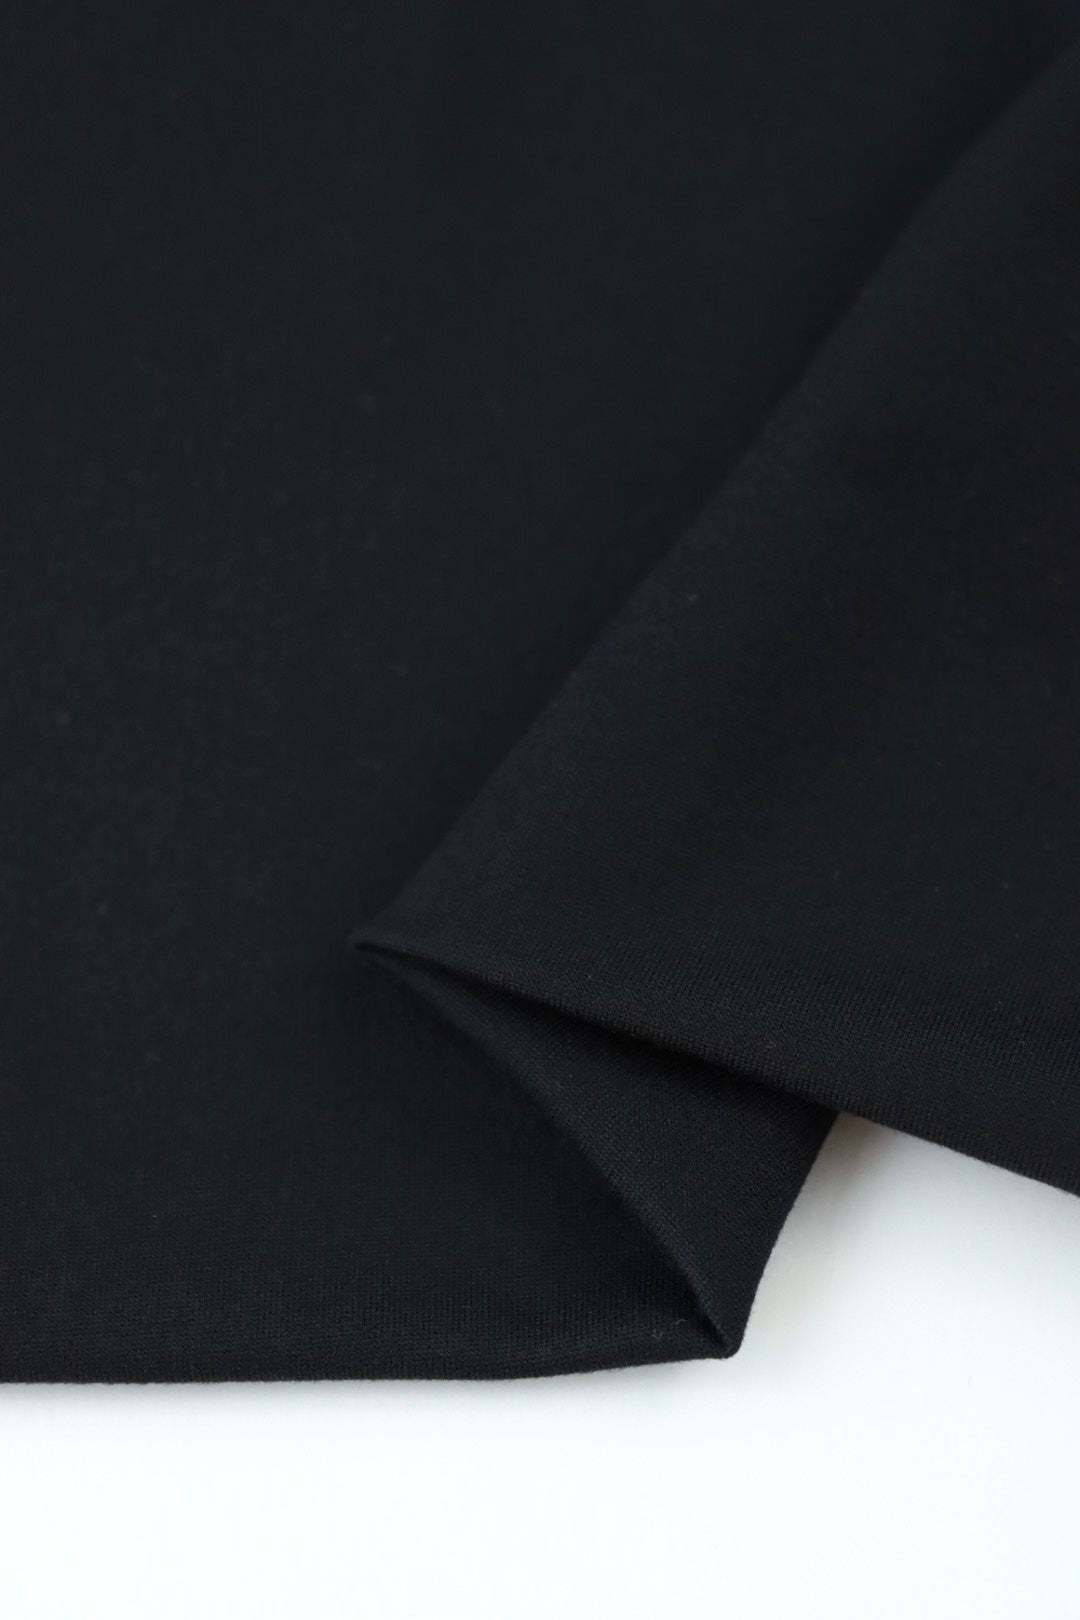 Black Double Brushed Poly Spandex Knit